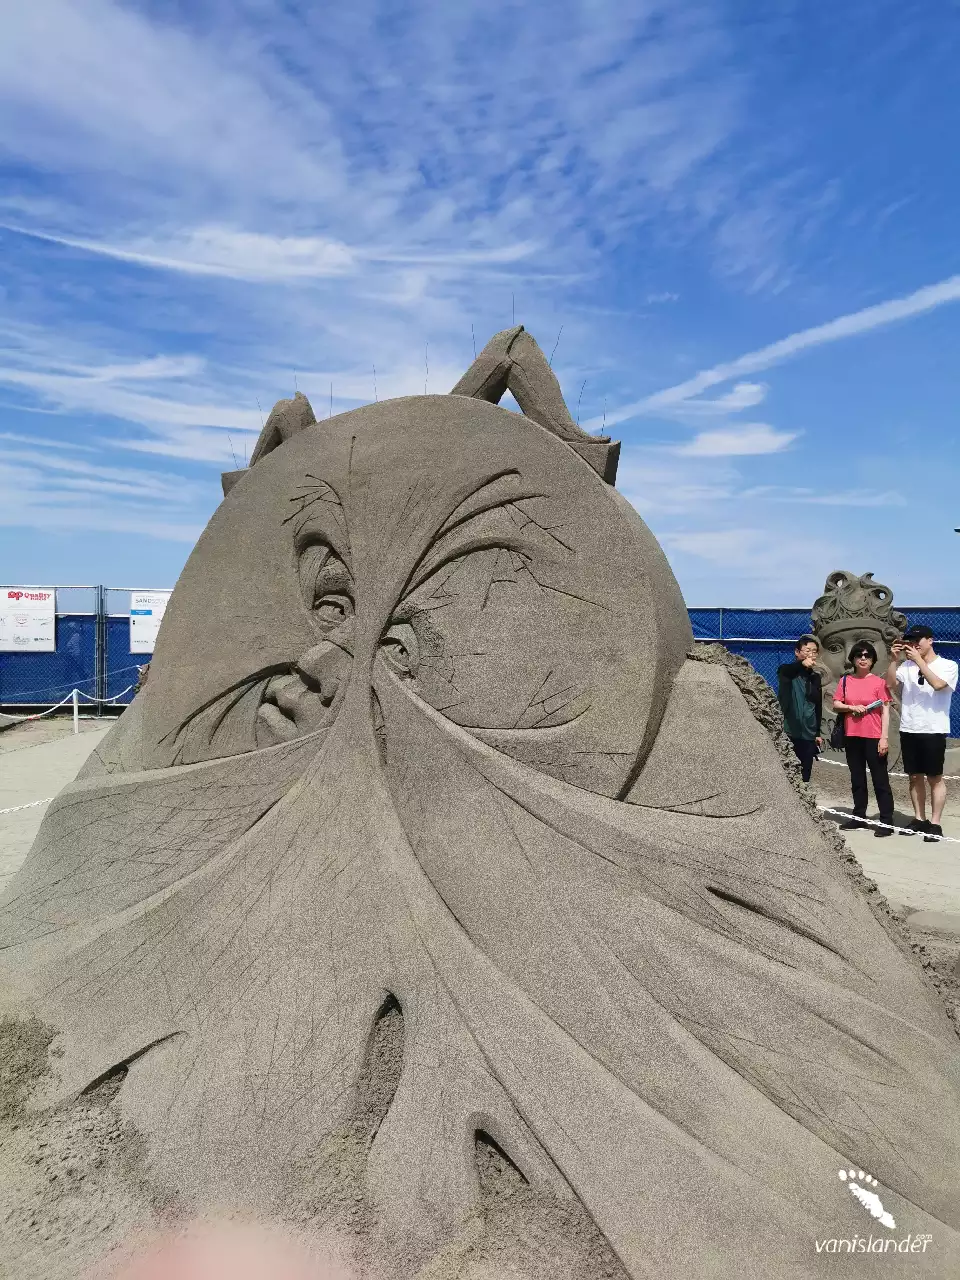 Sand Statue Of A Man Suffering - Parksville Festival, Vancouver Island